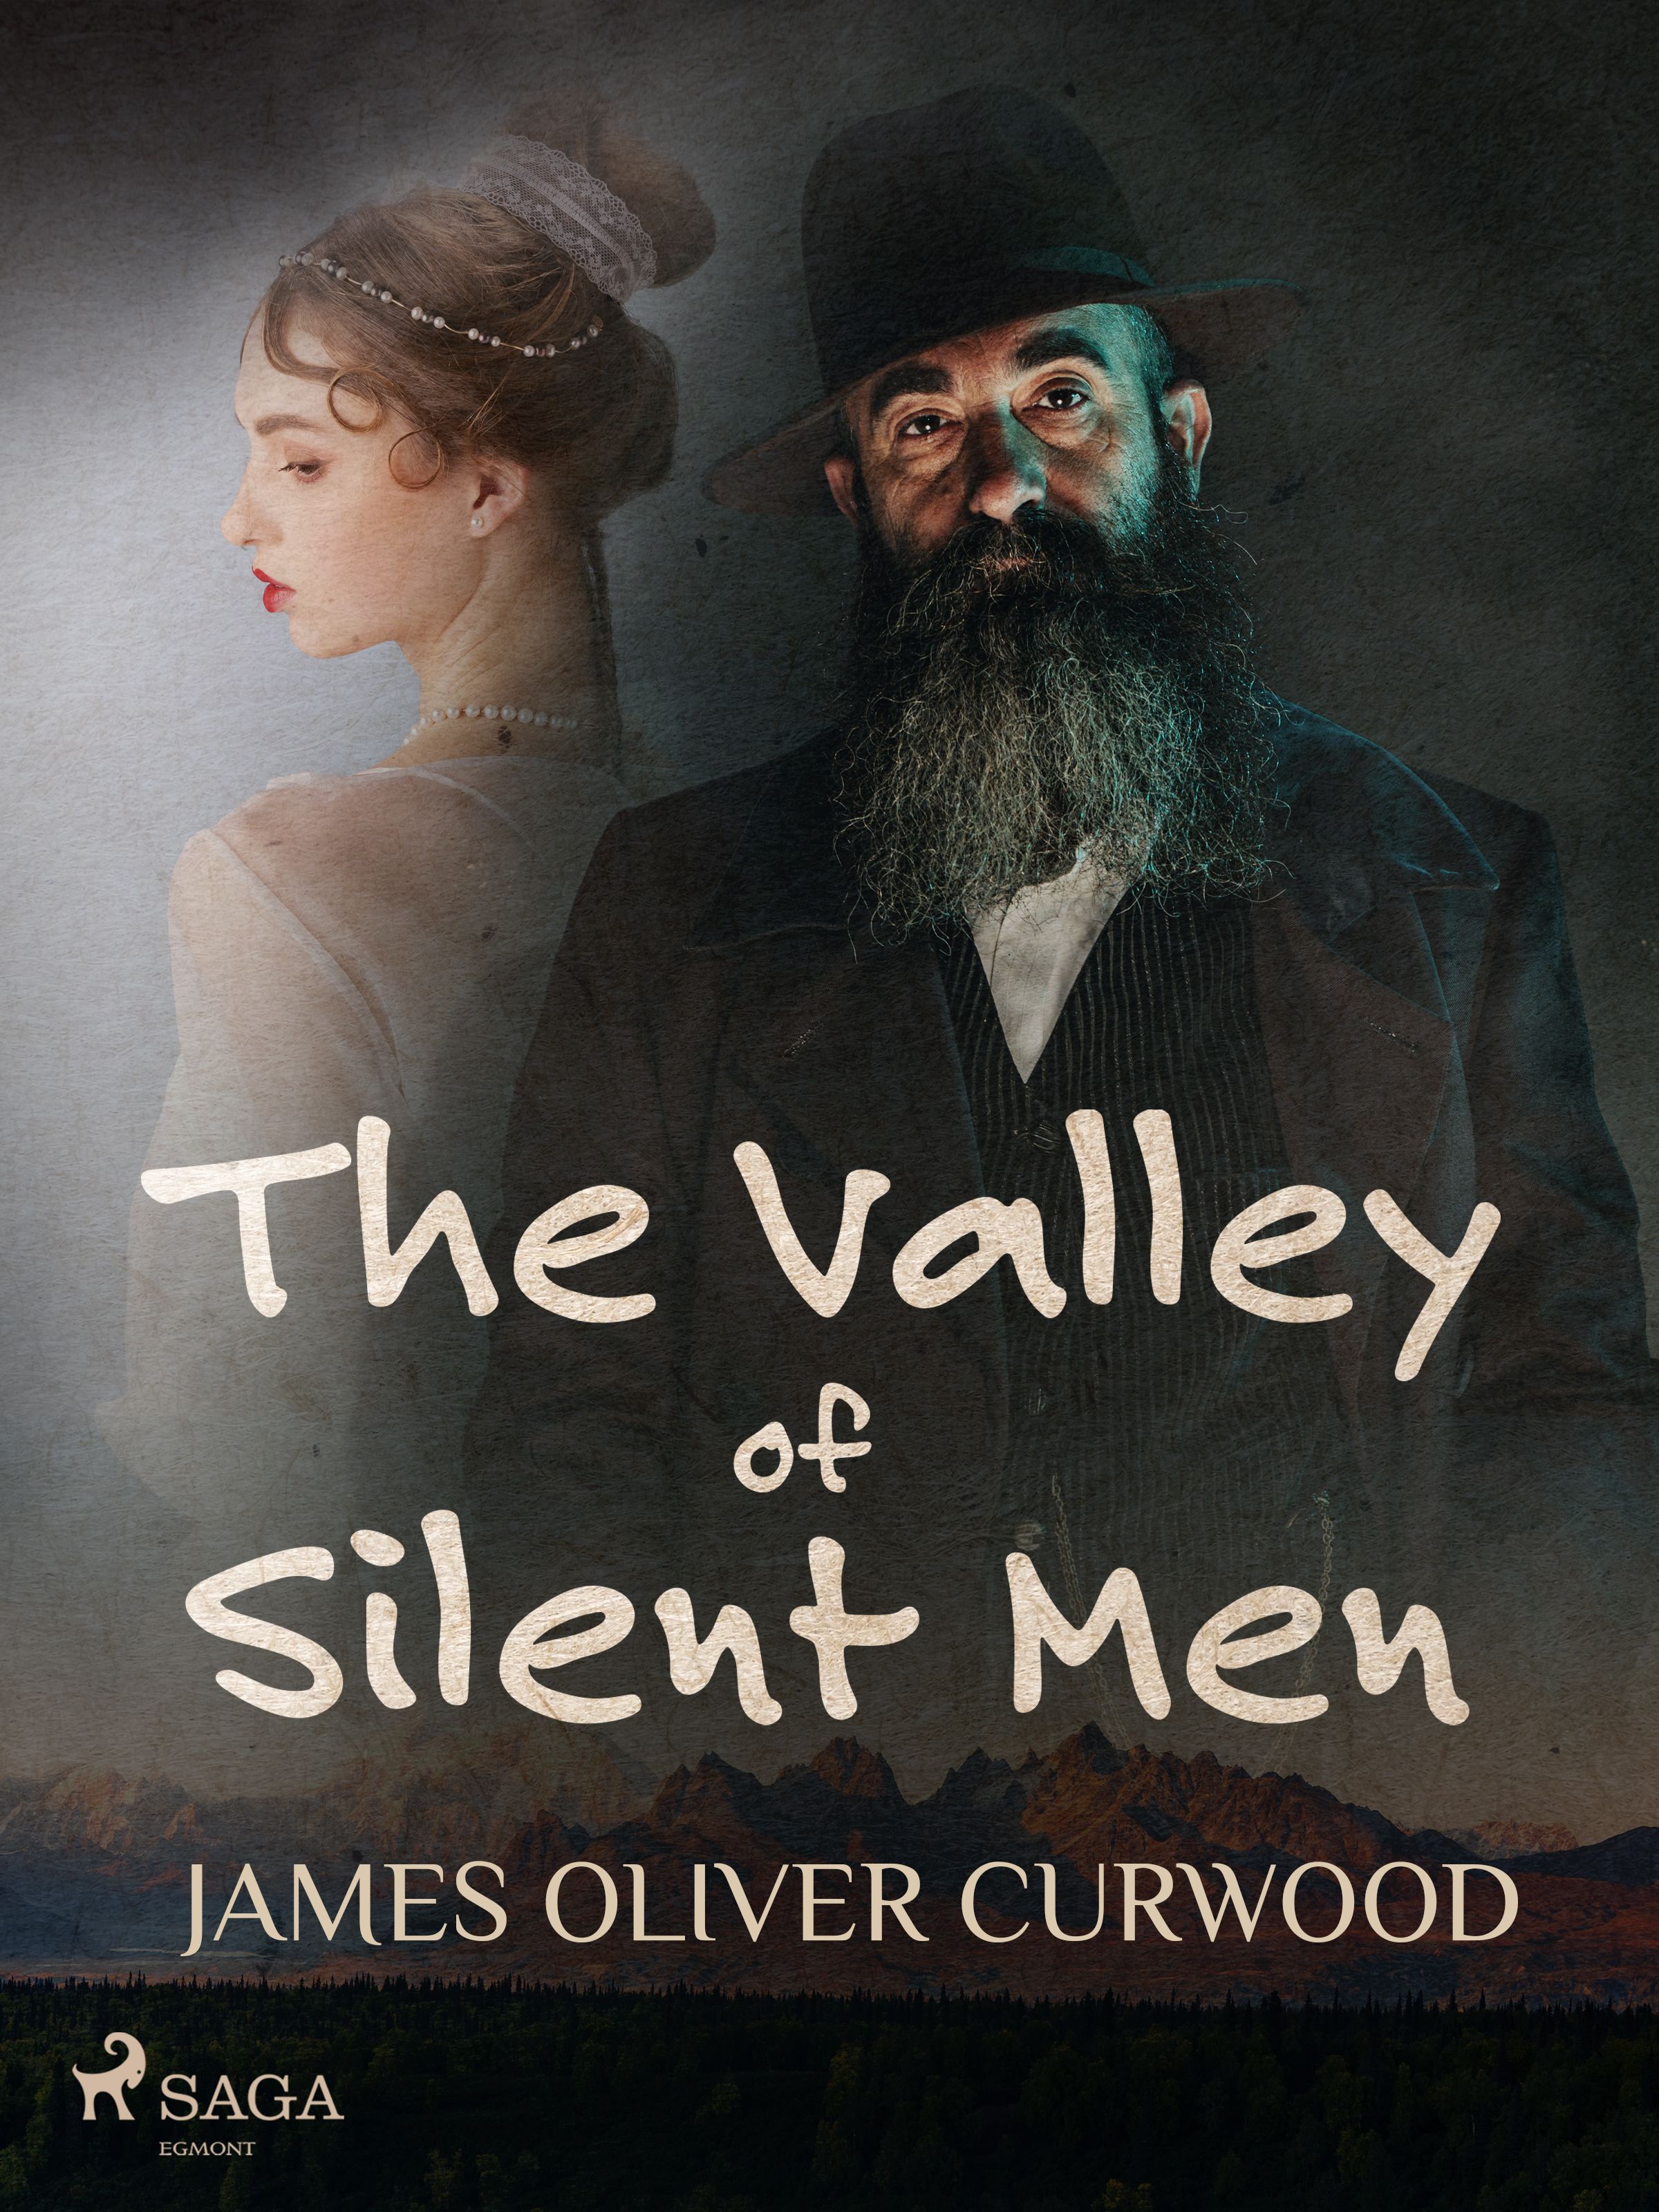 The Valley of Silent Men, eBook by James Oliver Curwood